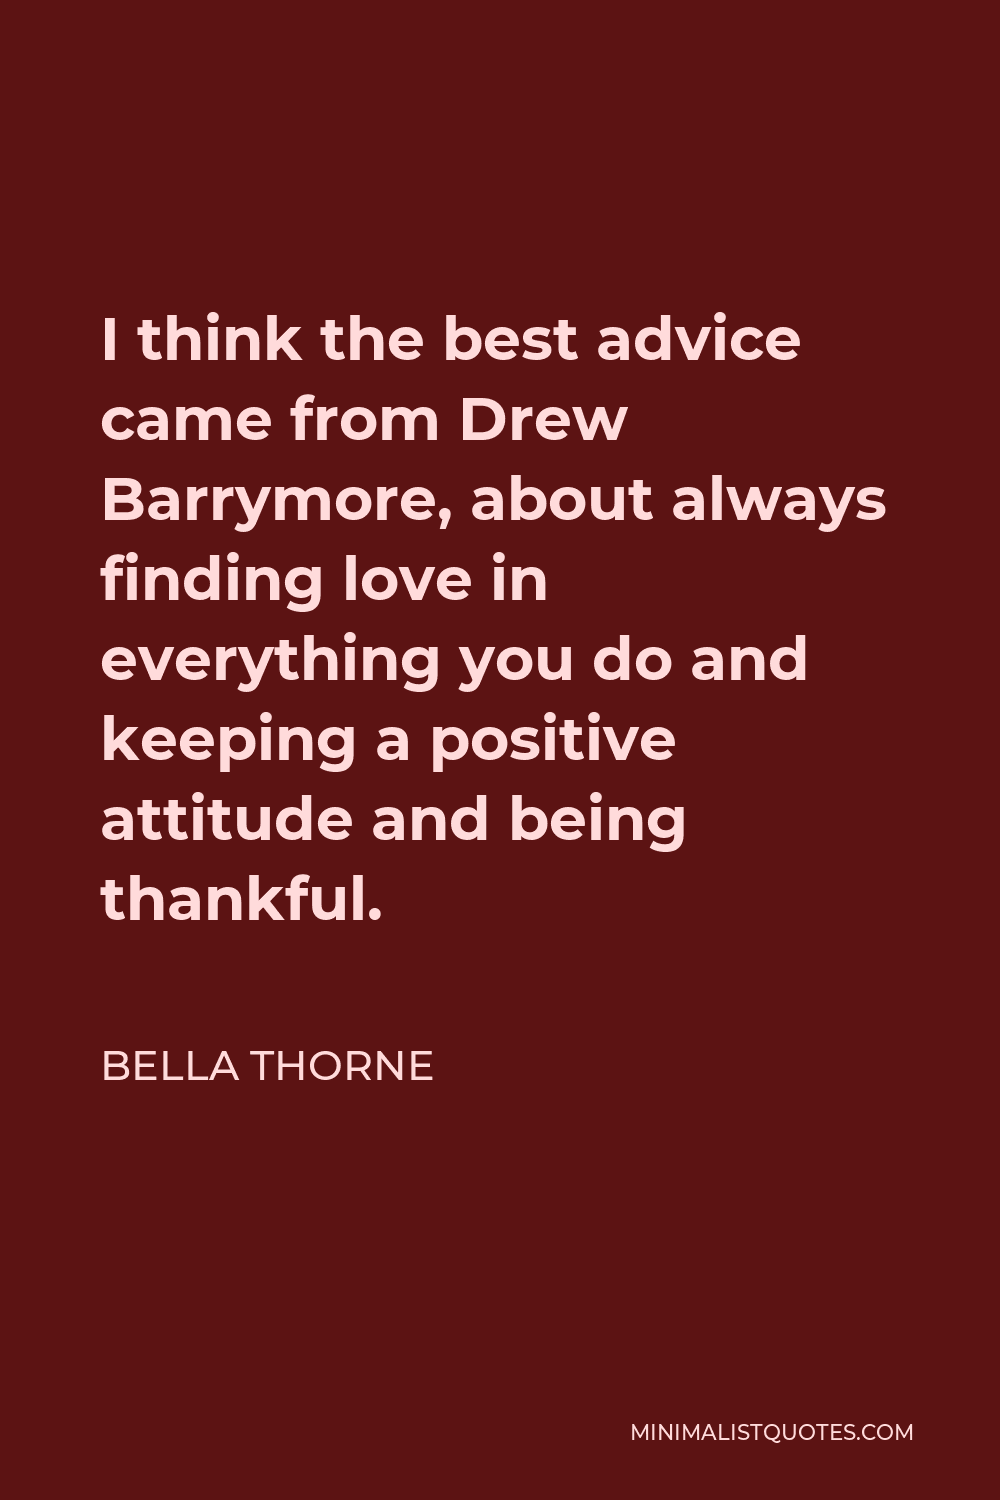 Bella Thorne Quote - I think the best advice came from Drew Barrymore, about always finding love in everything you do and keeping a positive attitude and being thankful.